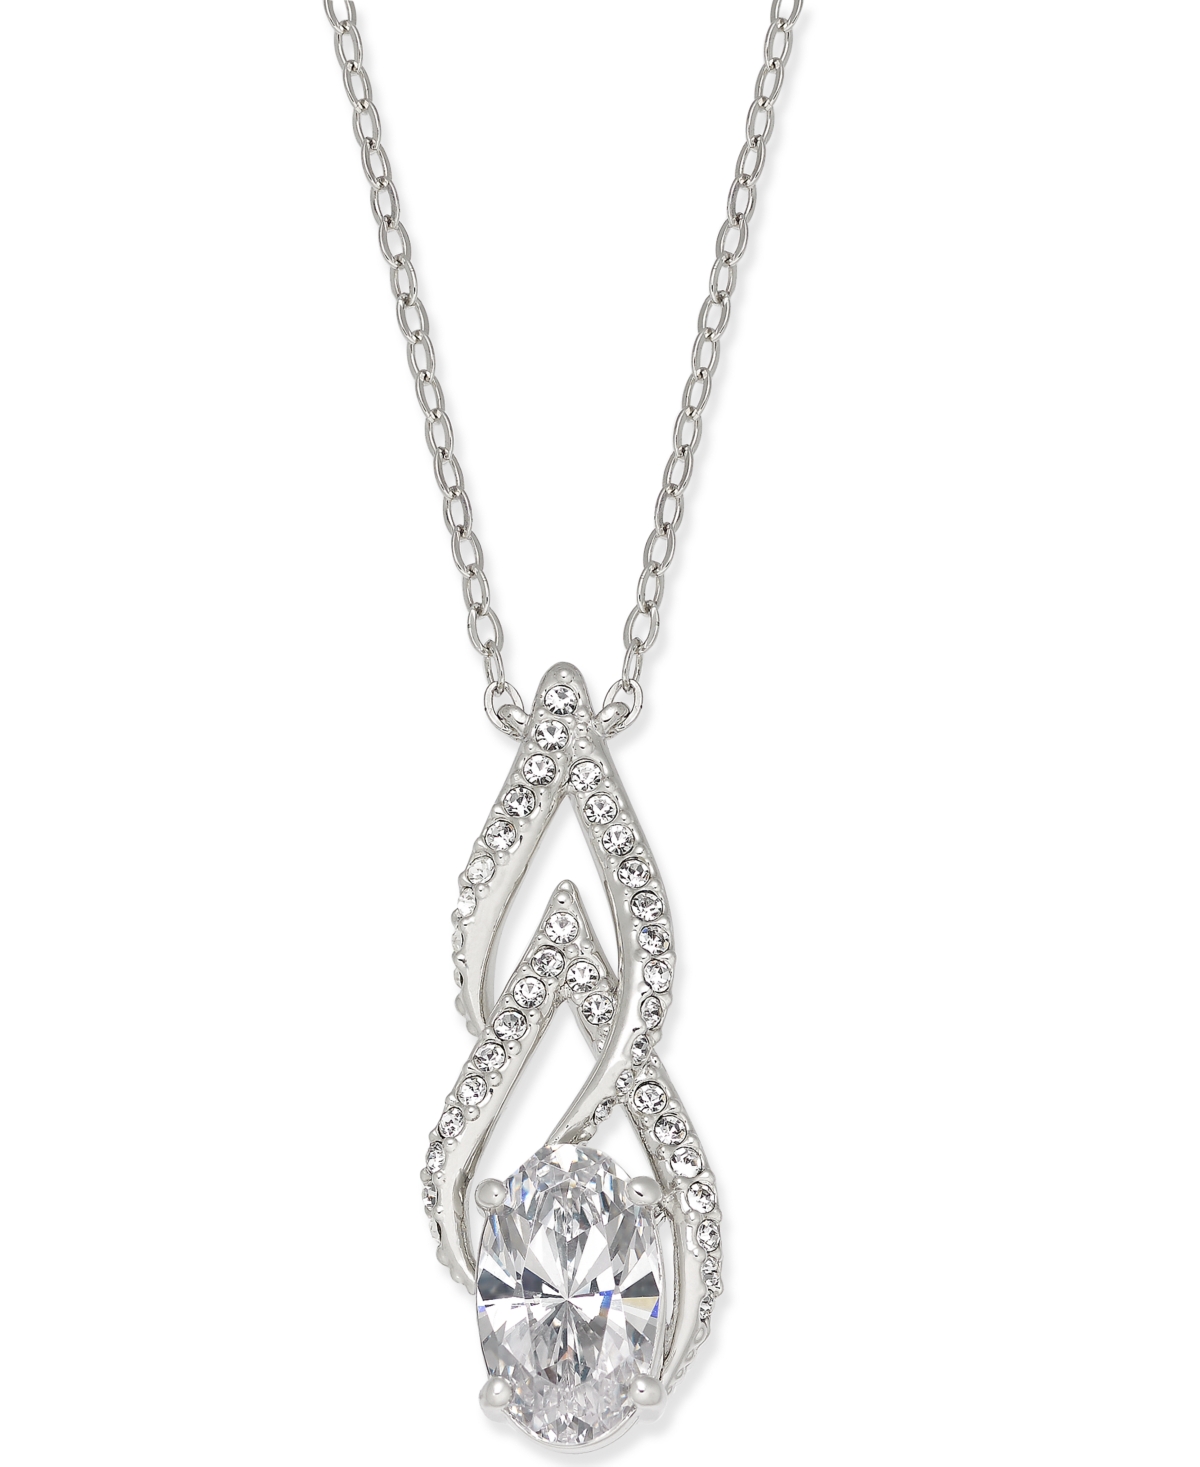 Silver-Tone Cubic Zirconia Pendant Necklace, Created for Macy's - Silver